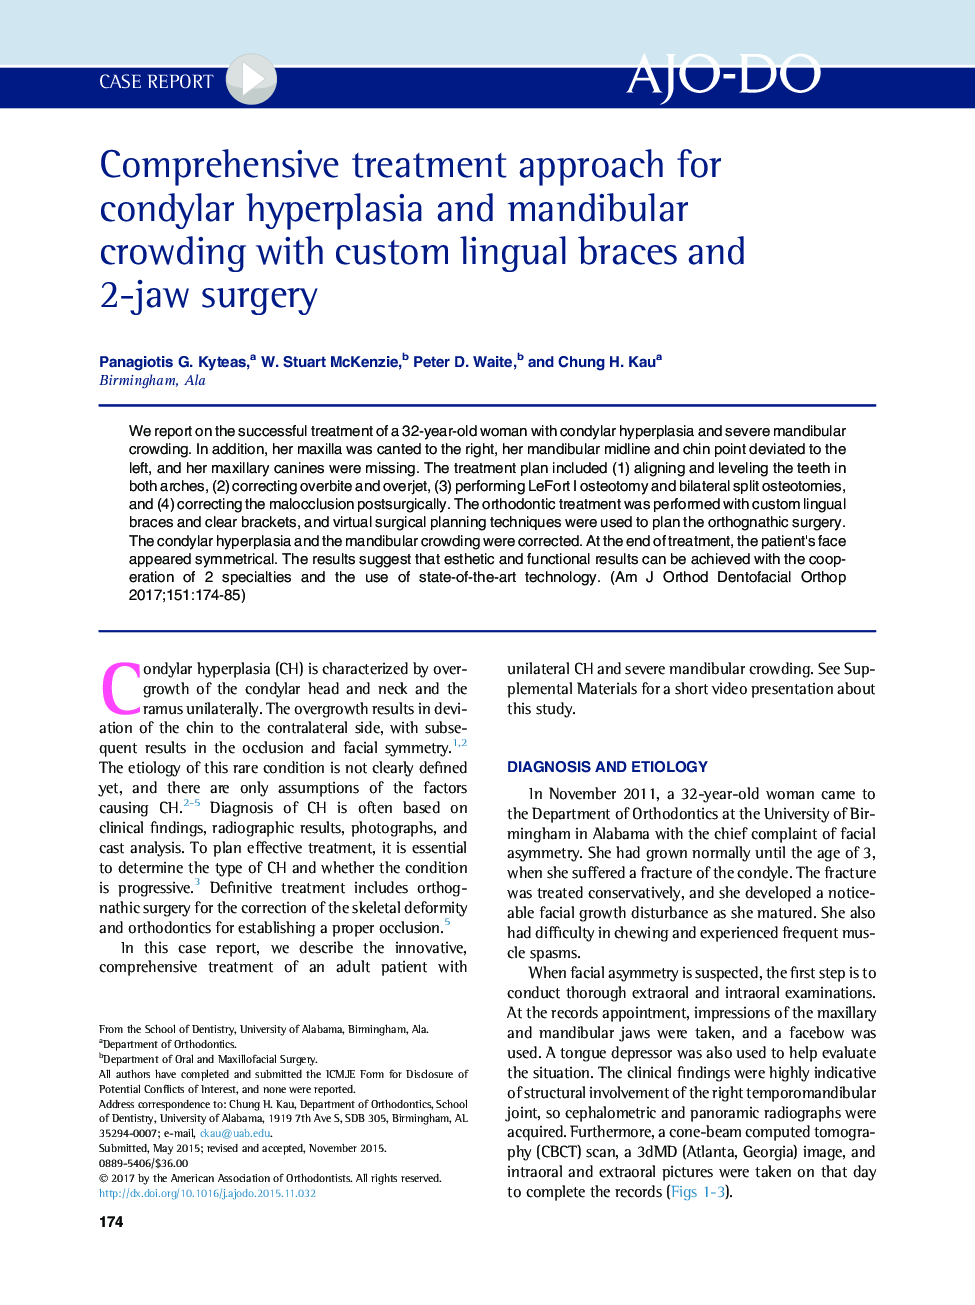 Comprehensive treatment approach for condylar hyperplasia and mandibular crowding with custom lingual braces and 2-jaw surgery